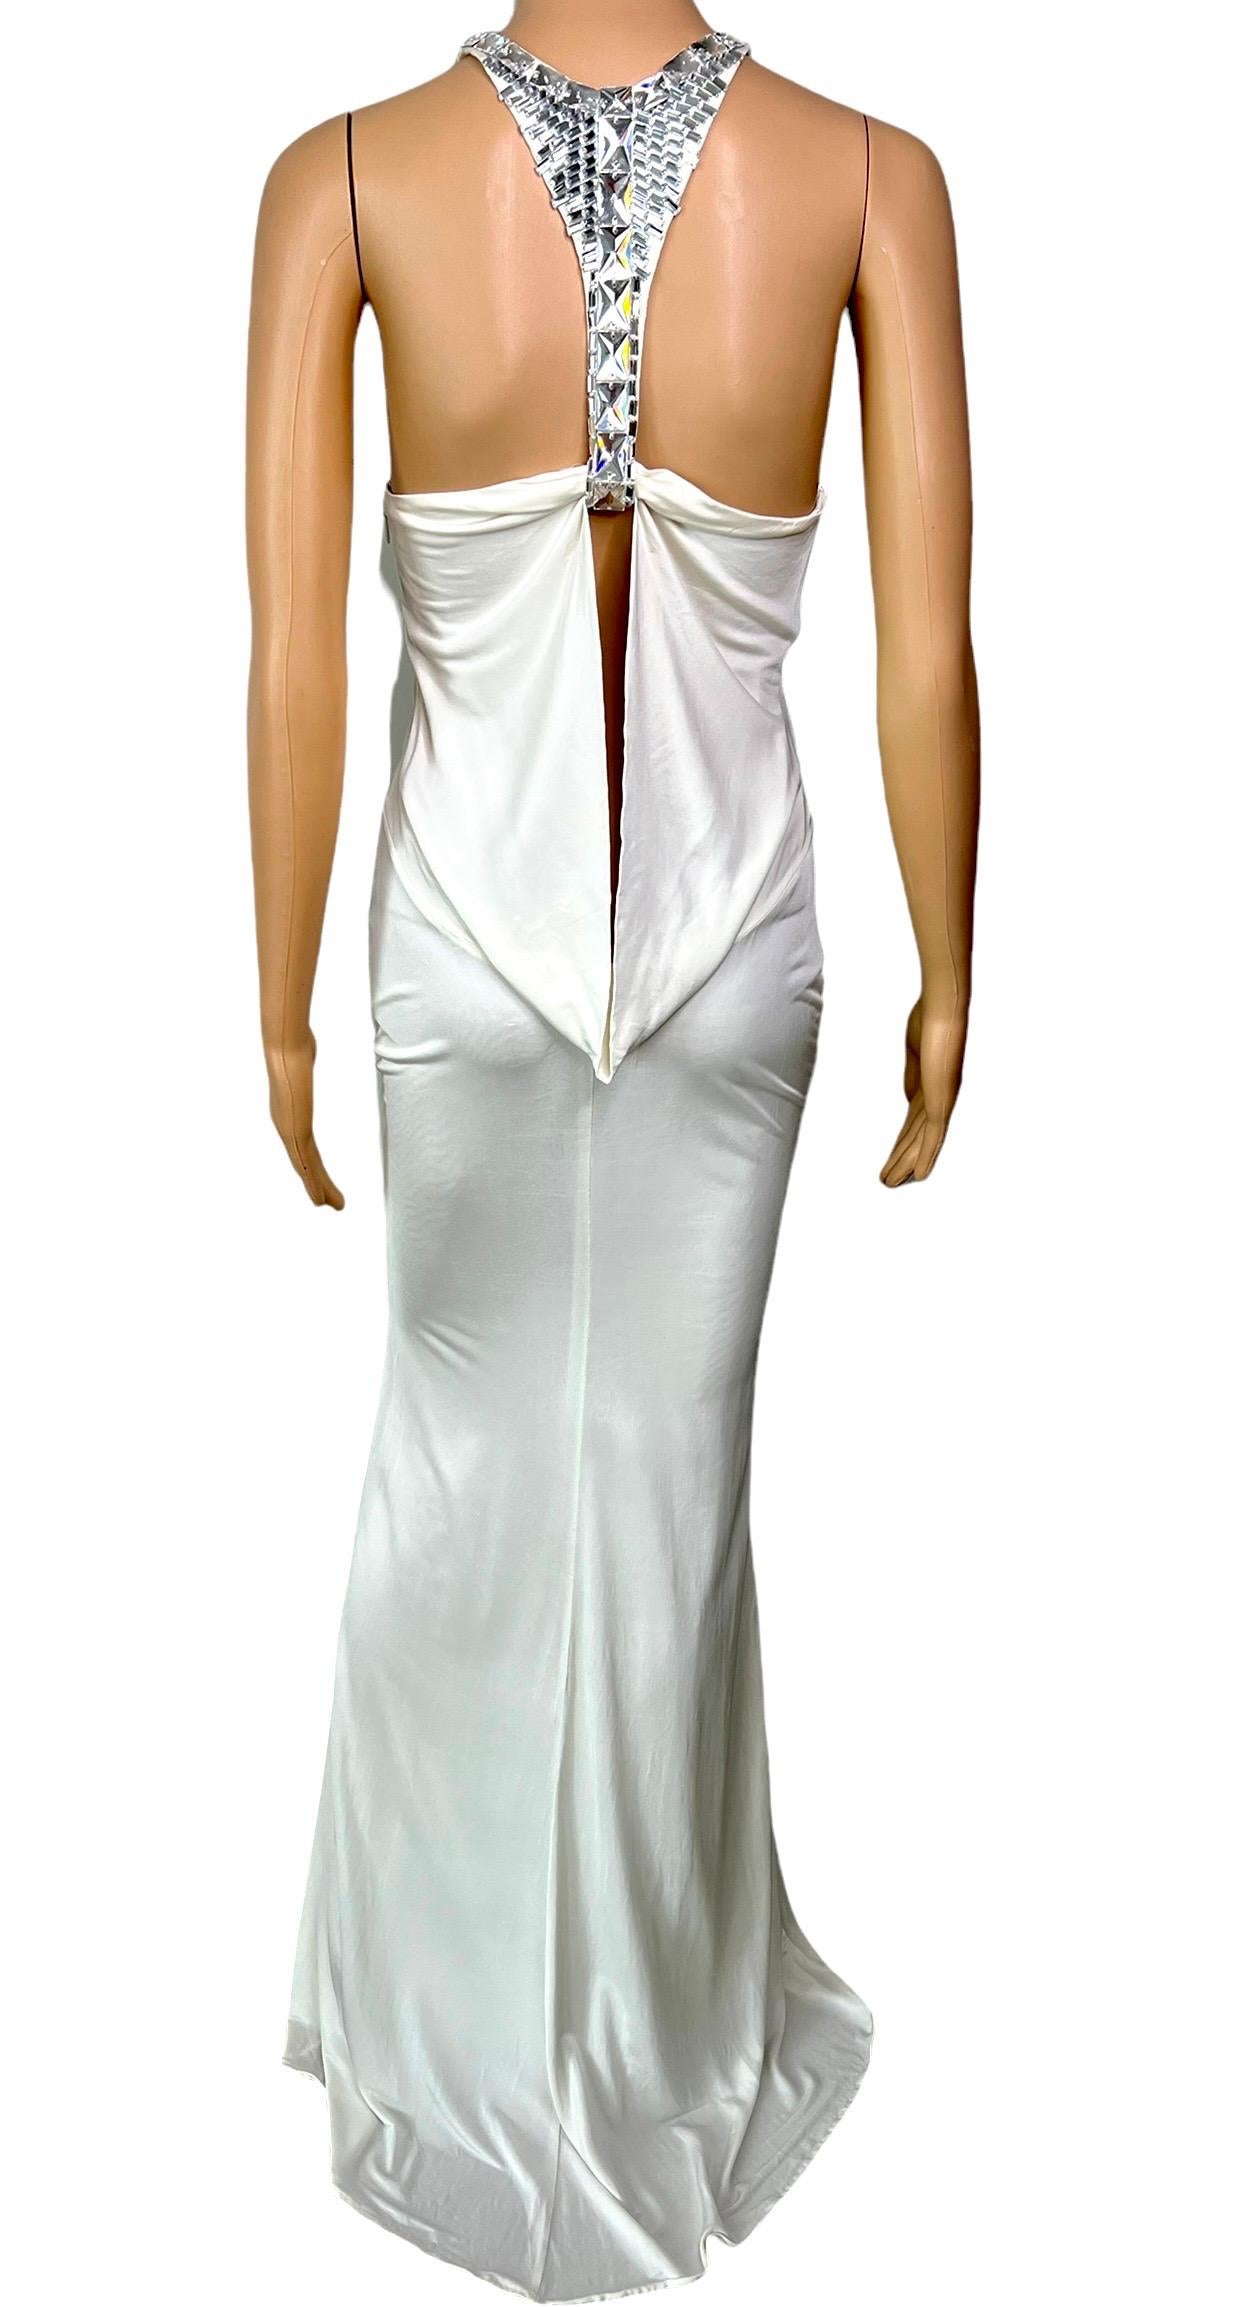 Tom Ford for Gucci F/W 2004 Embellished Plunging Cutout Ivory Evening Dress Gown For Sale 4